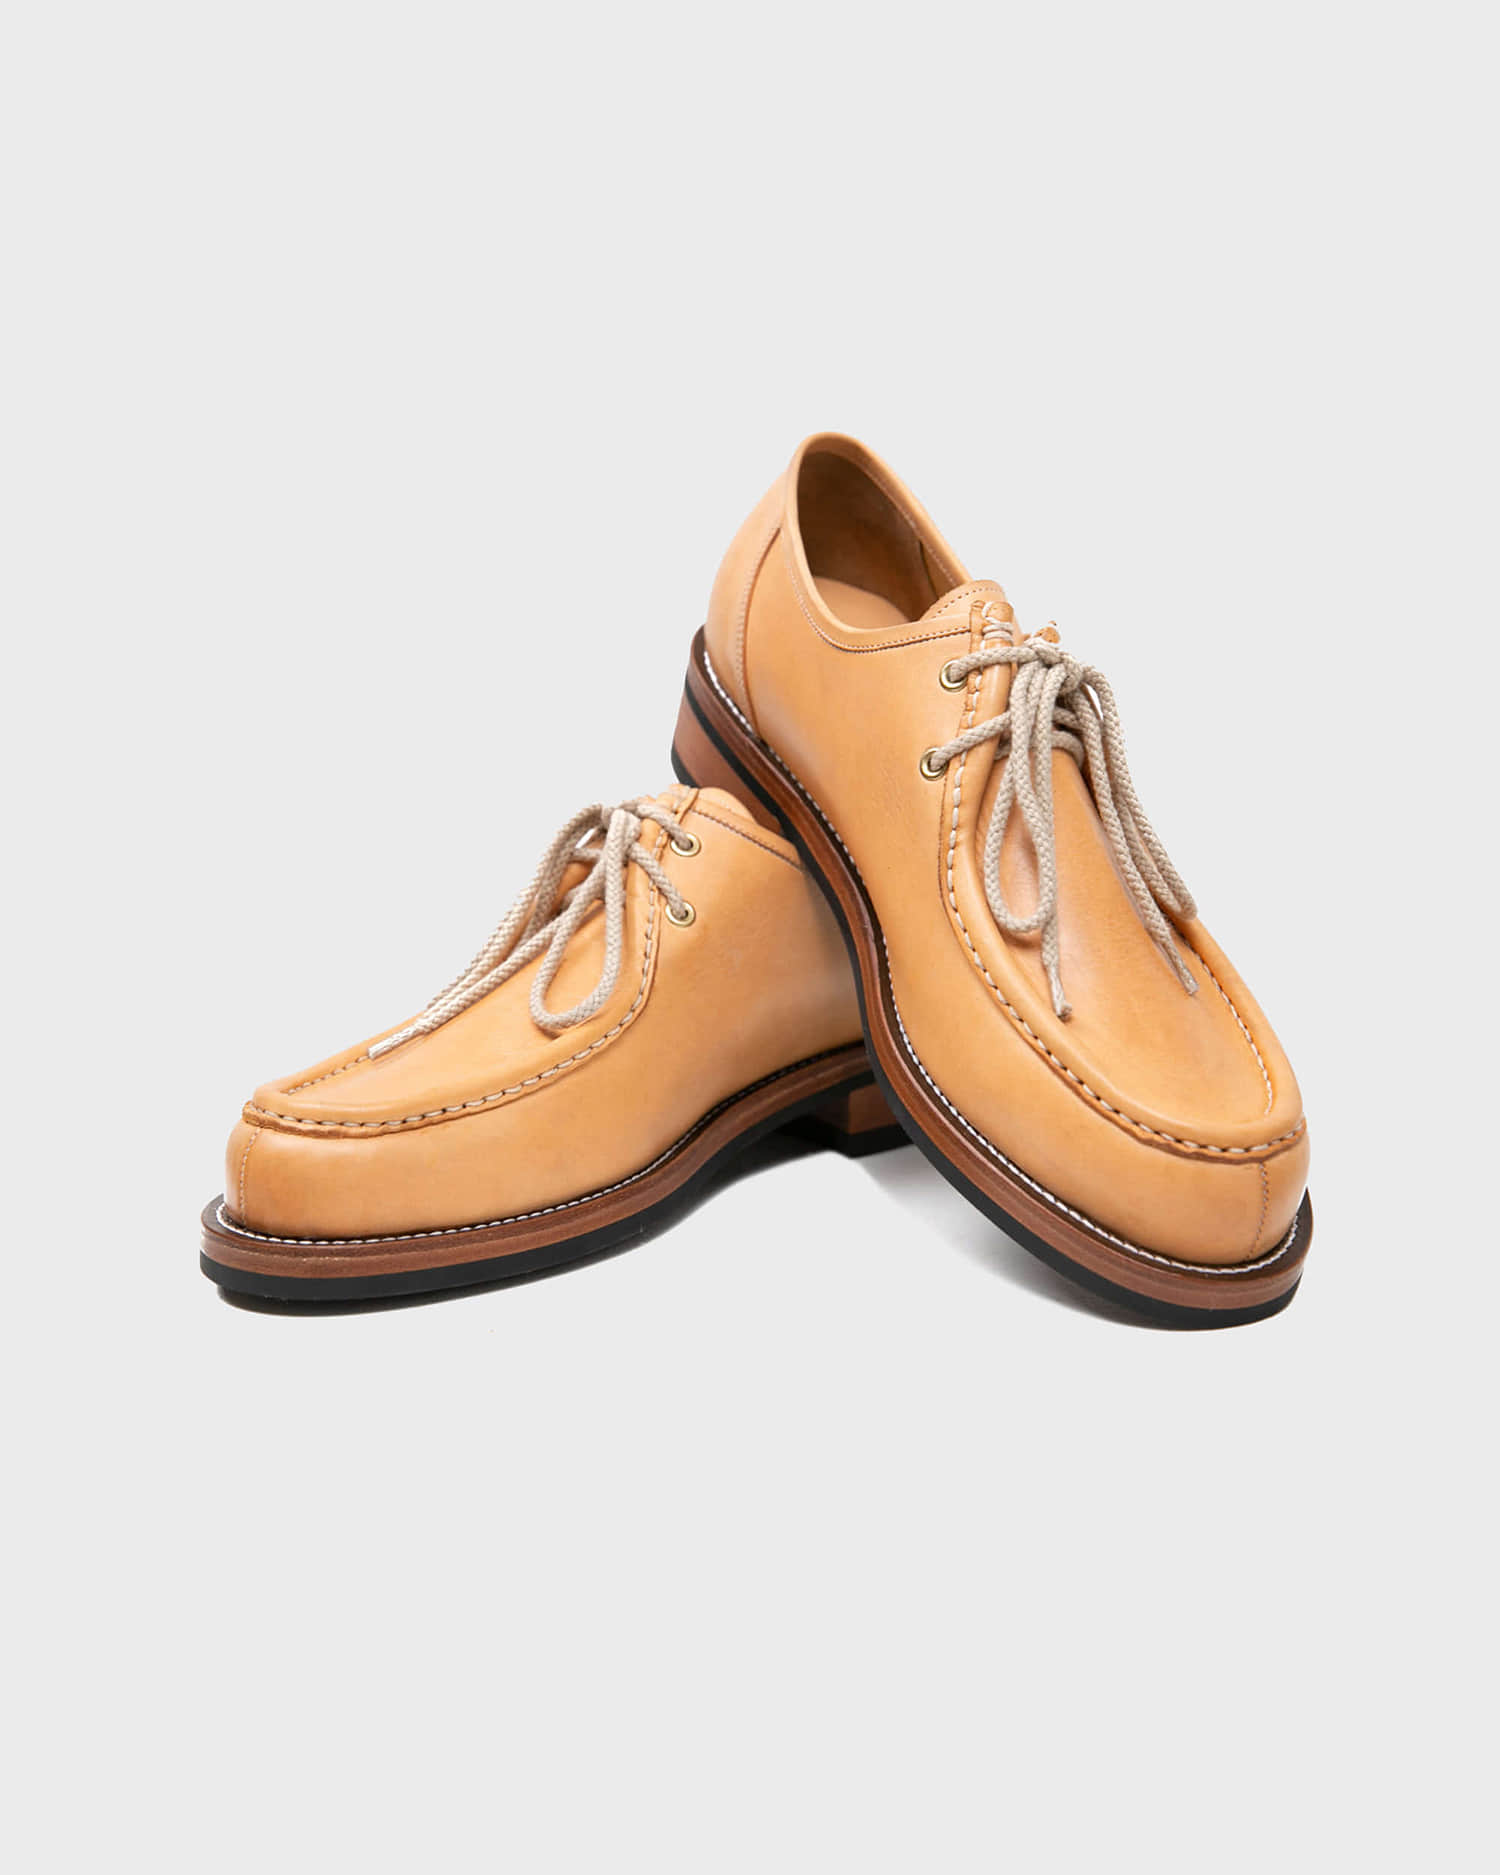 [BILLYS&amp;CO X ANGLAN] Tyrolean Derby Shoes - Natural